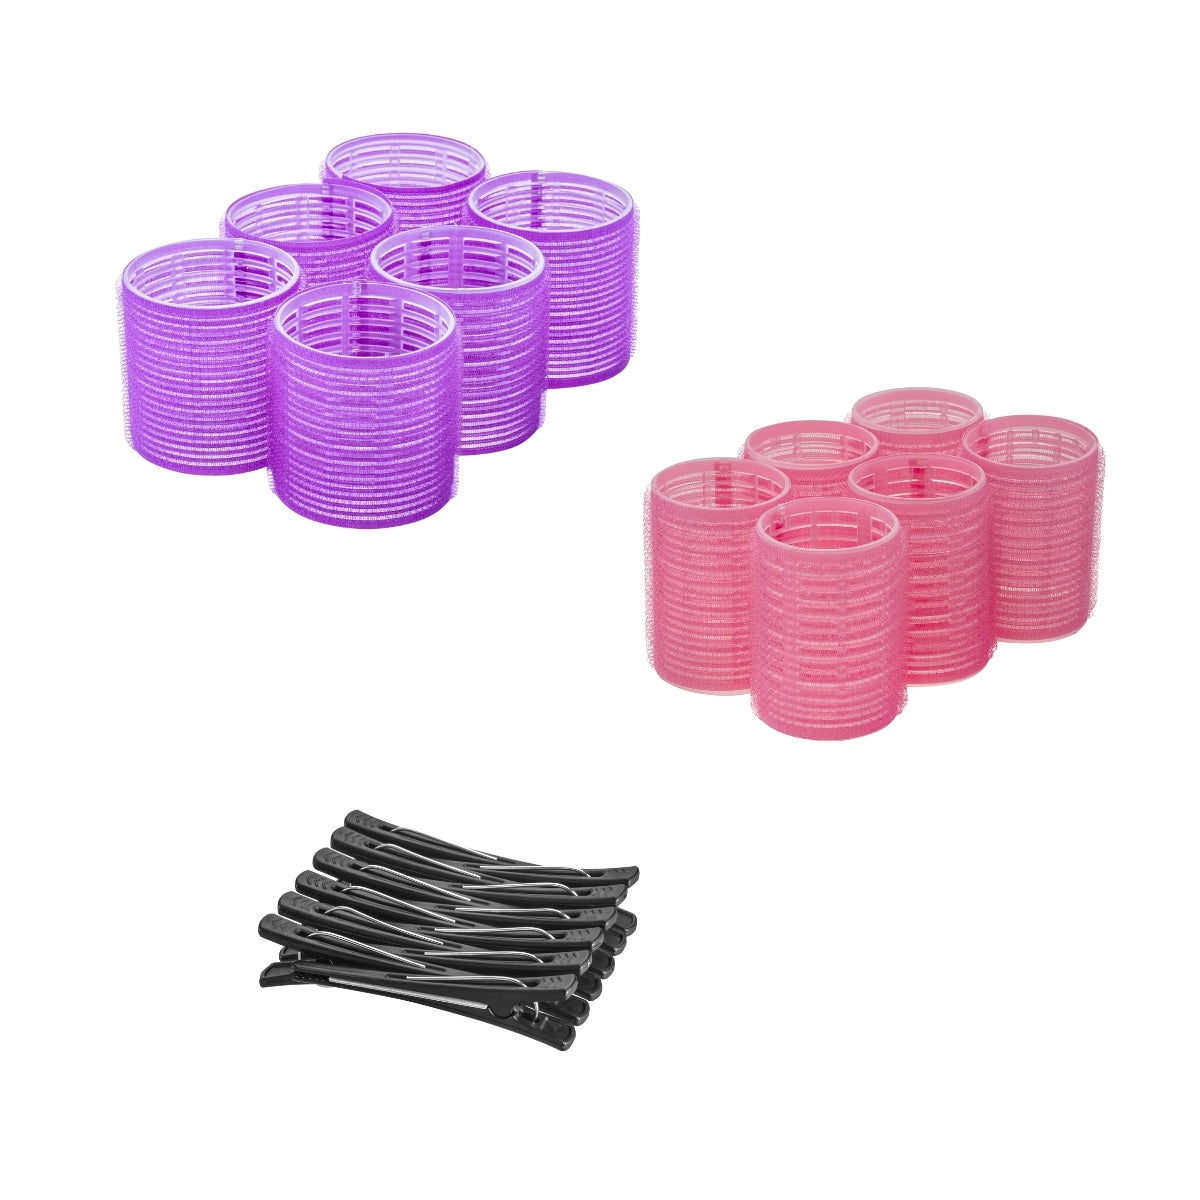 Self Grip Rollers for Hair - Salon Hair Curlers Set for Long, Medium, Short Hair – Big Hair Rollers for Styling and Extra Volume 2 Size (6 Large - 6 Jumbo) and 12 Clip. - Depilcompany